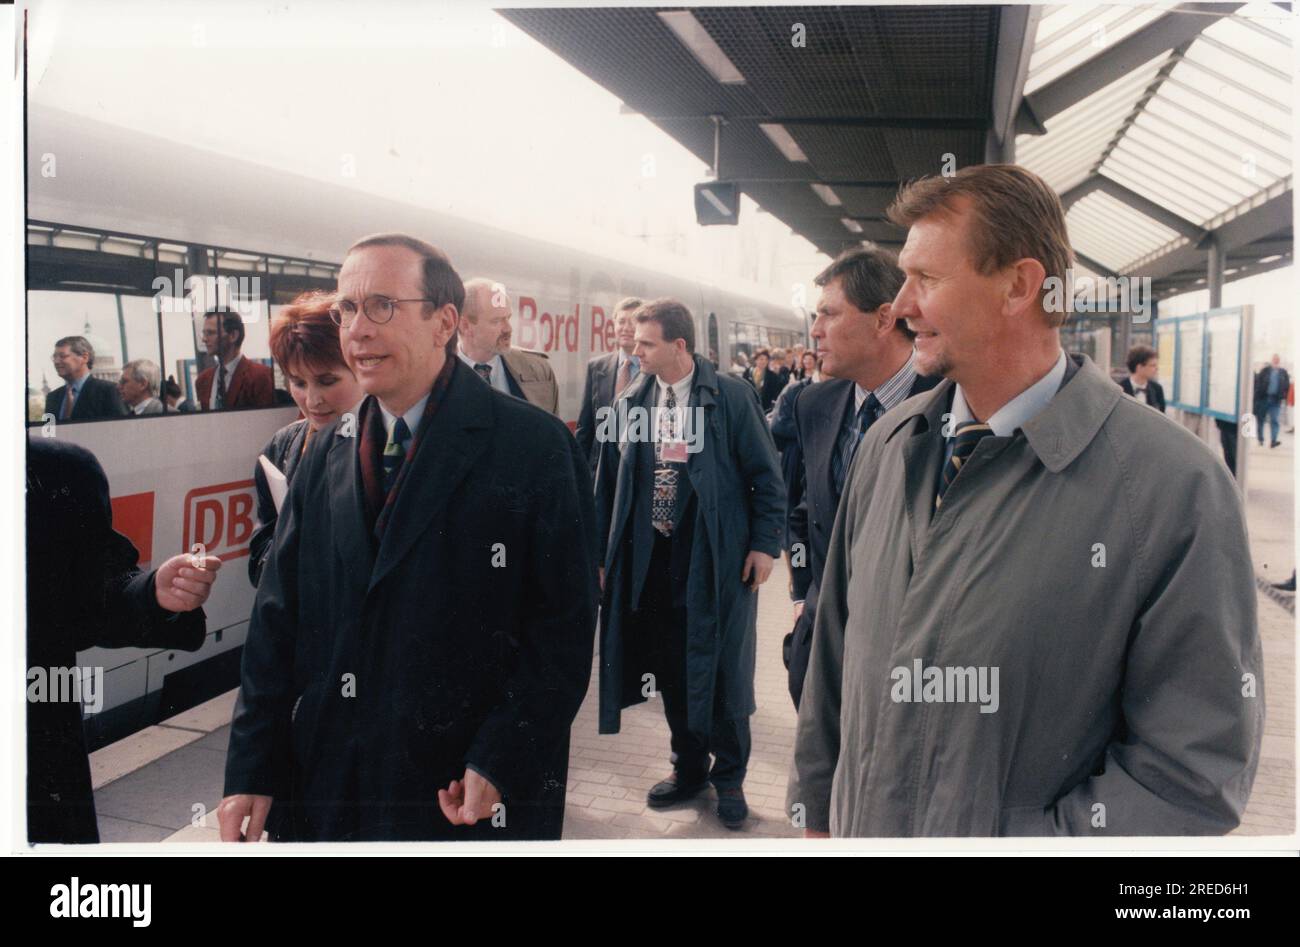 Transport ministers from 34 European countries visit Potsdam after the 81st conference in Berlin. Arrival at the city train station. Federal Minister of Transport Matthias Wissmann (l.) and Brandenburg's Minister of Transport Meyer (r.). Minister. Transport. Foreign visit. Foreign economic relations. Photo: MAZ/Archive, 1997Transport ministers from 34 European countries visit Potsdam after the 81st conference in Berlin. Arrival at the city train station. Federal Minister of Transport Matthias Wissmann (l.) and Brandenburg's Minister of Transport Meyer (r.). Photo: MAZ/Archive, 1997 [automated Stock Photo